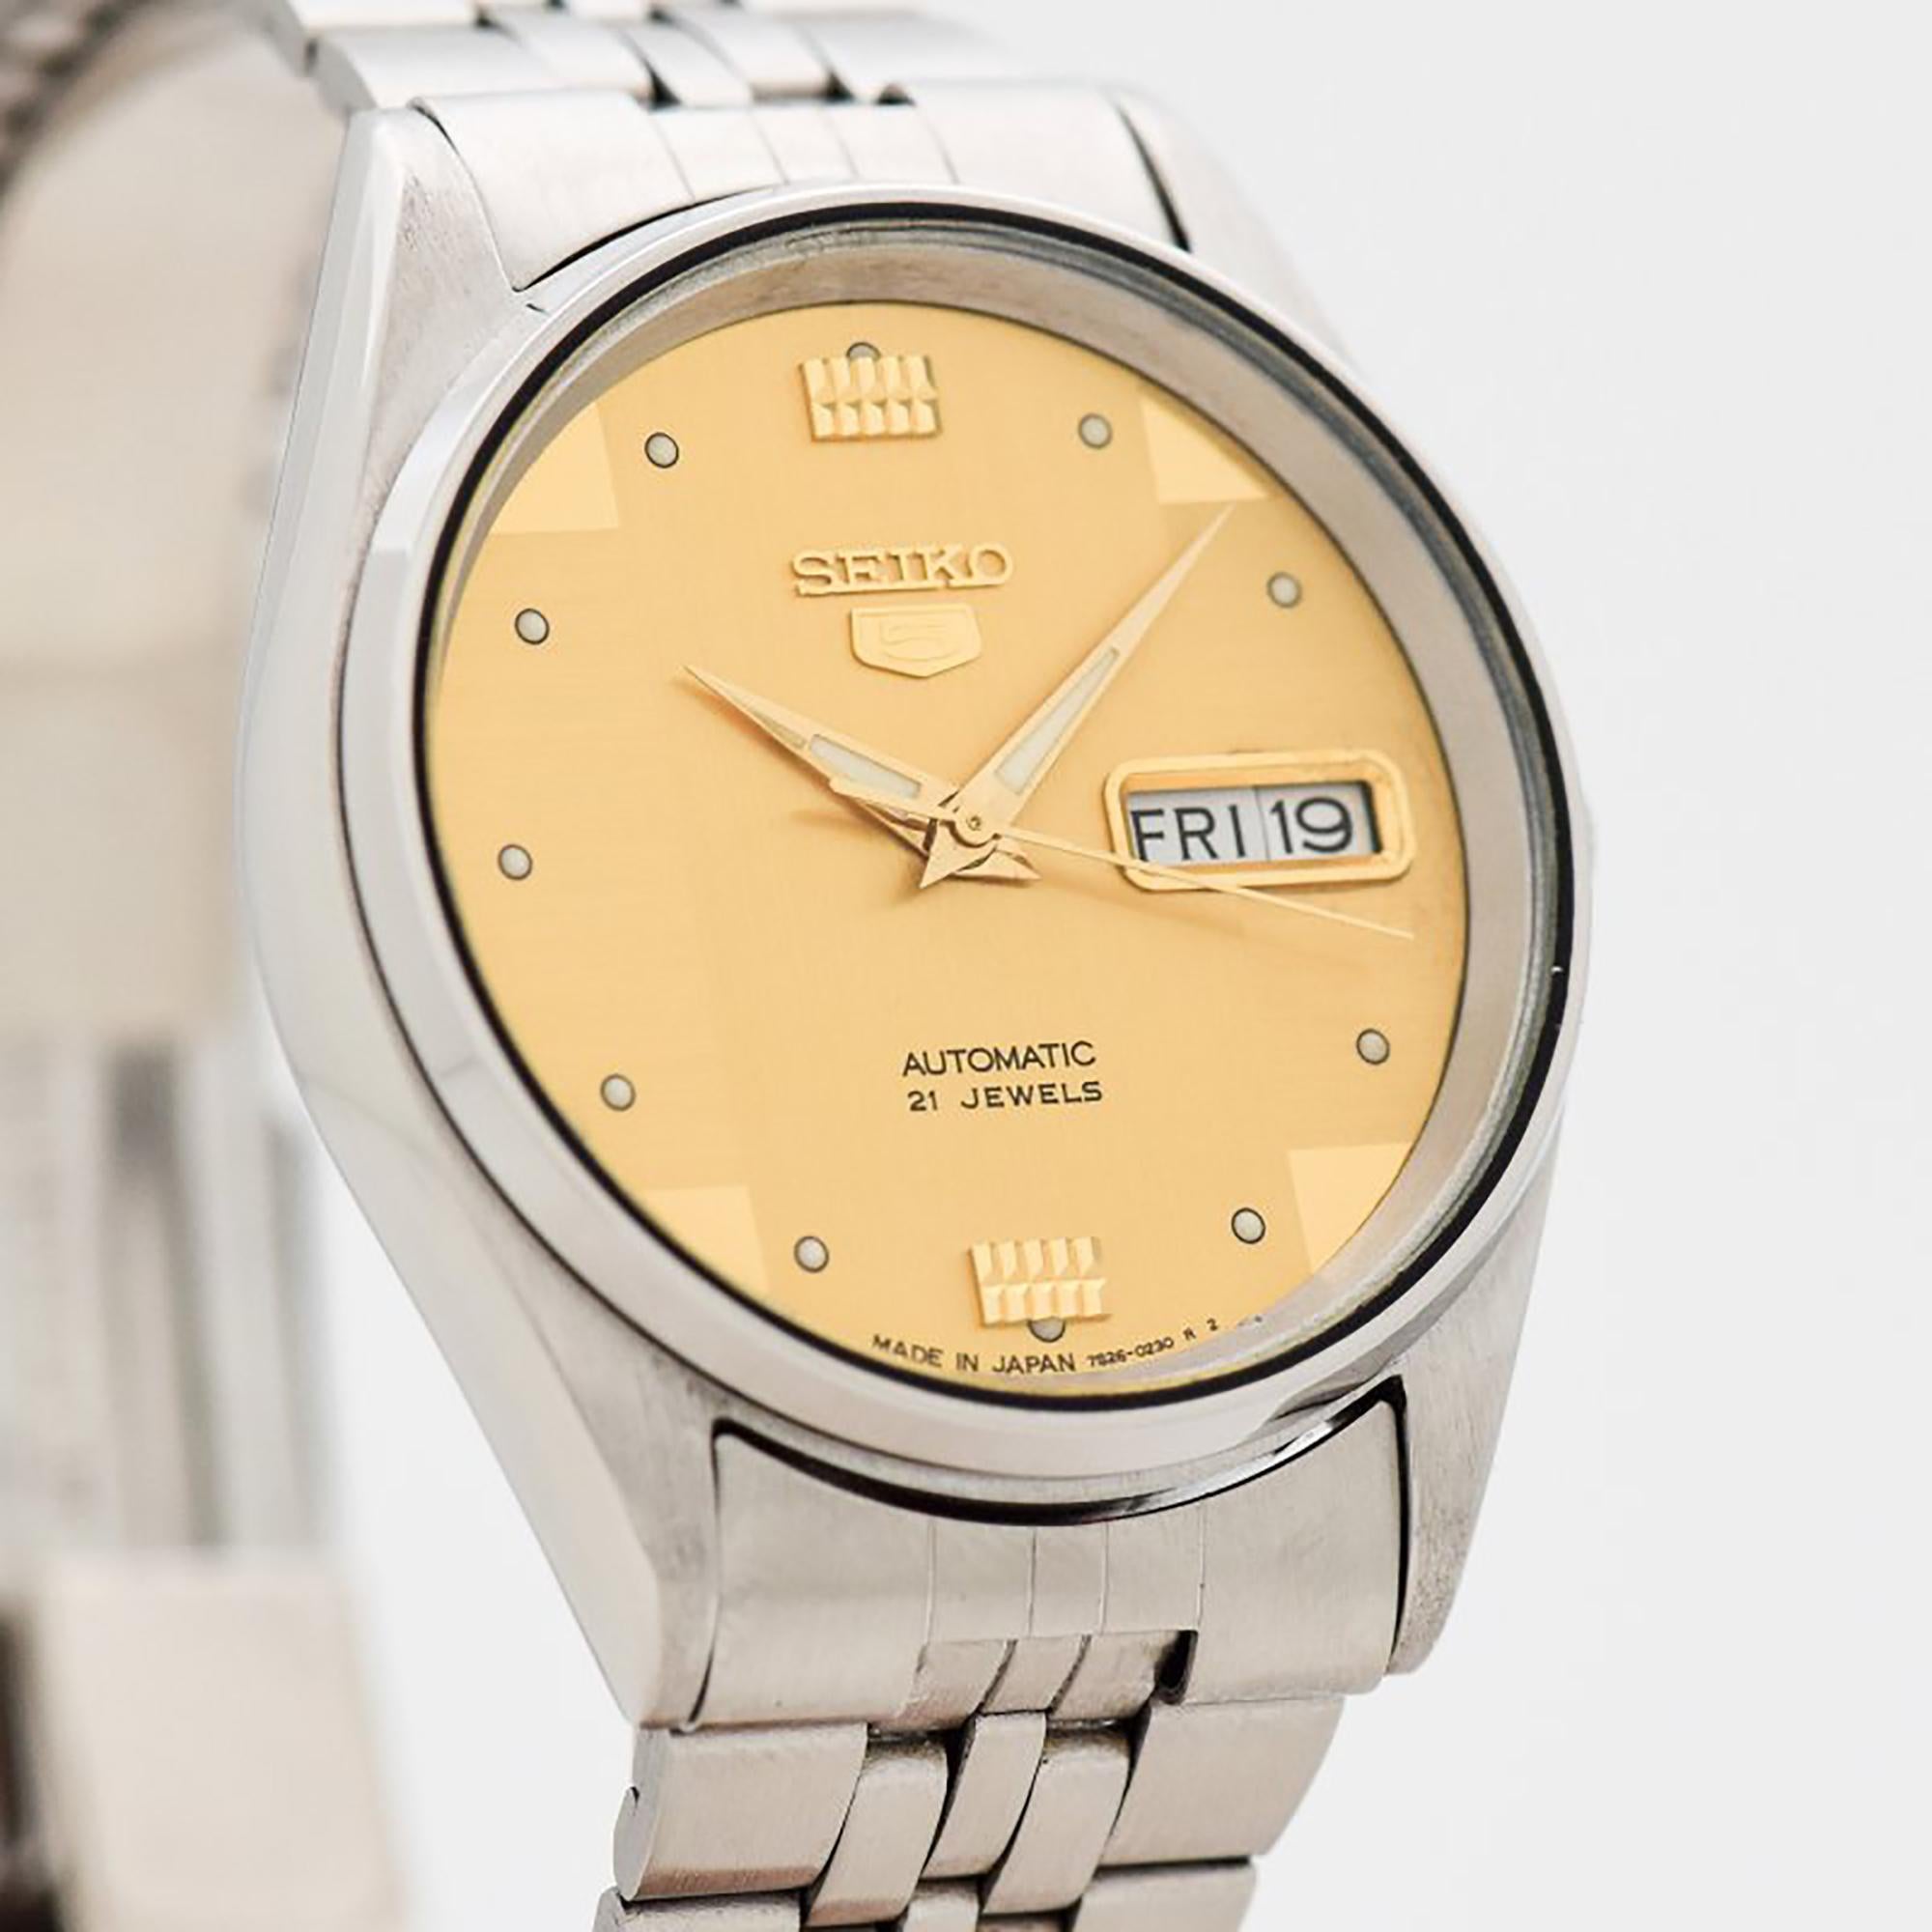 1982 Vintage Seiko 5 Automatic Ref. 6309-8906 Stainless Steel watch with Original Three Shades of Gold Dial with Original Seiko Stainless Steel Bracelet. 35mm x 42mm lug to lug (1.38 in. x 1.65 in.) - Powered by a 17-jewel, automatic caliber